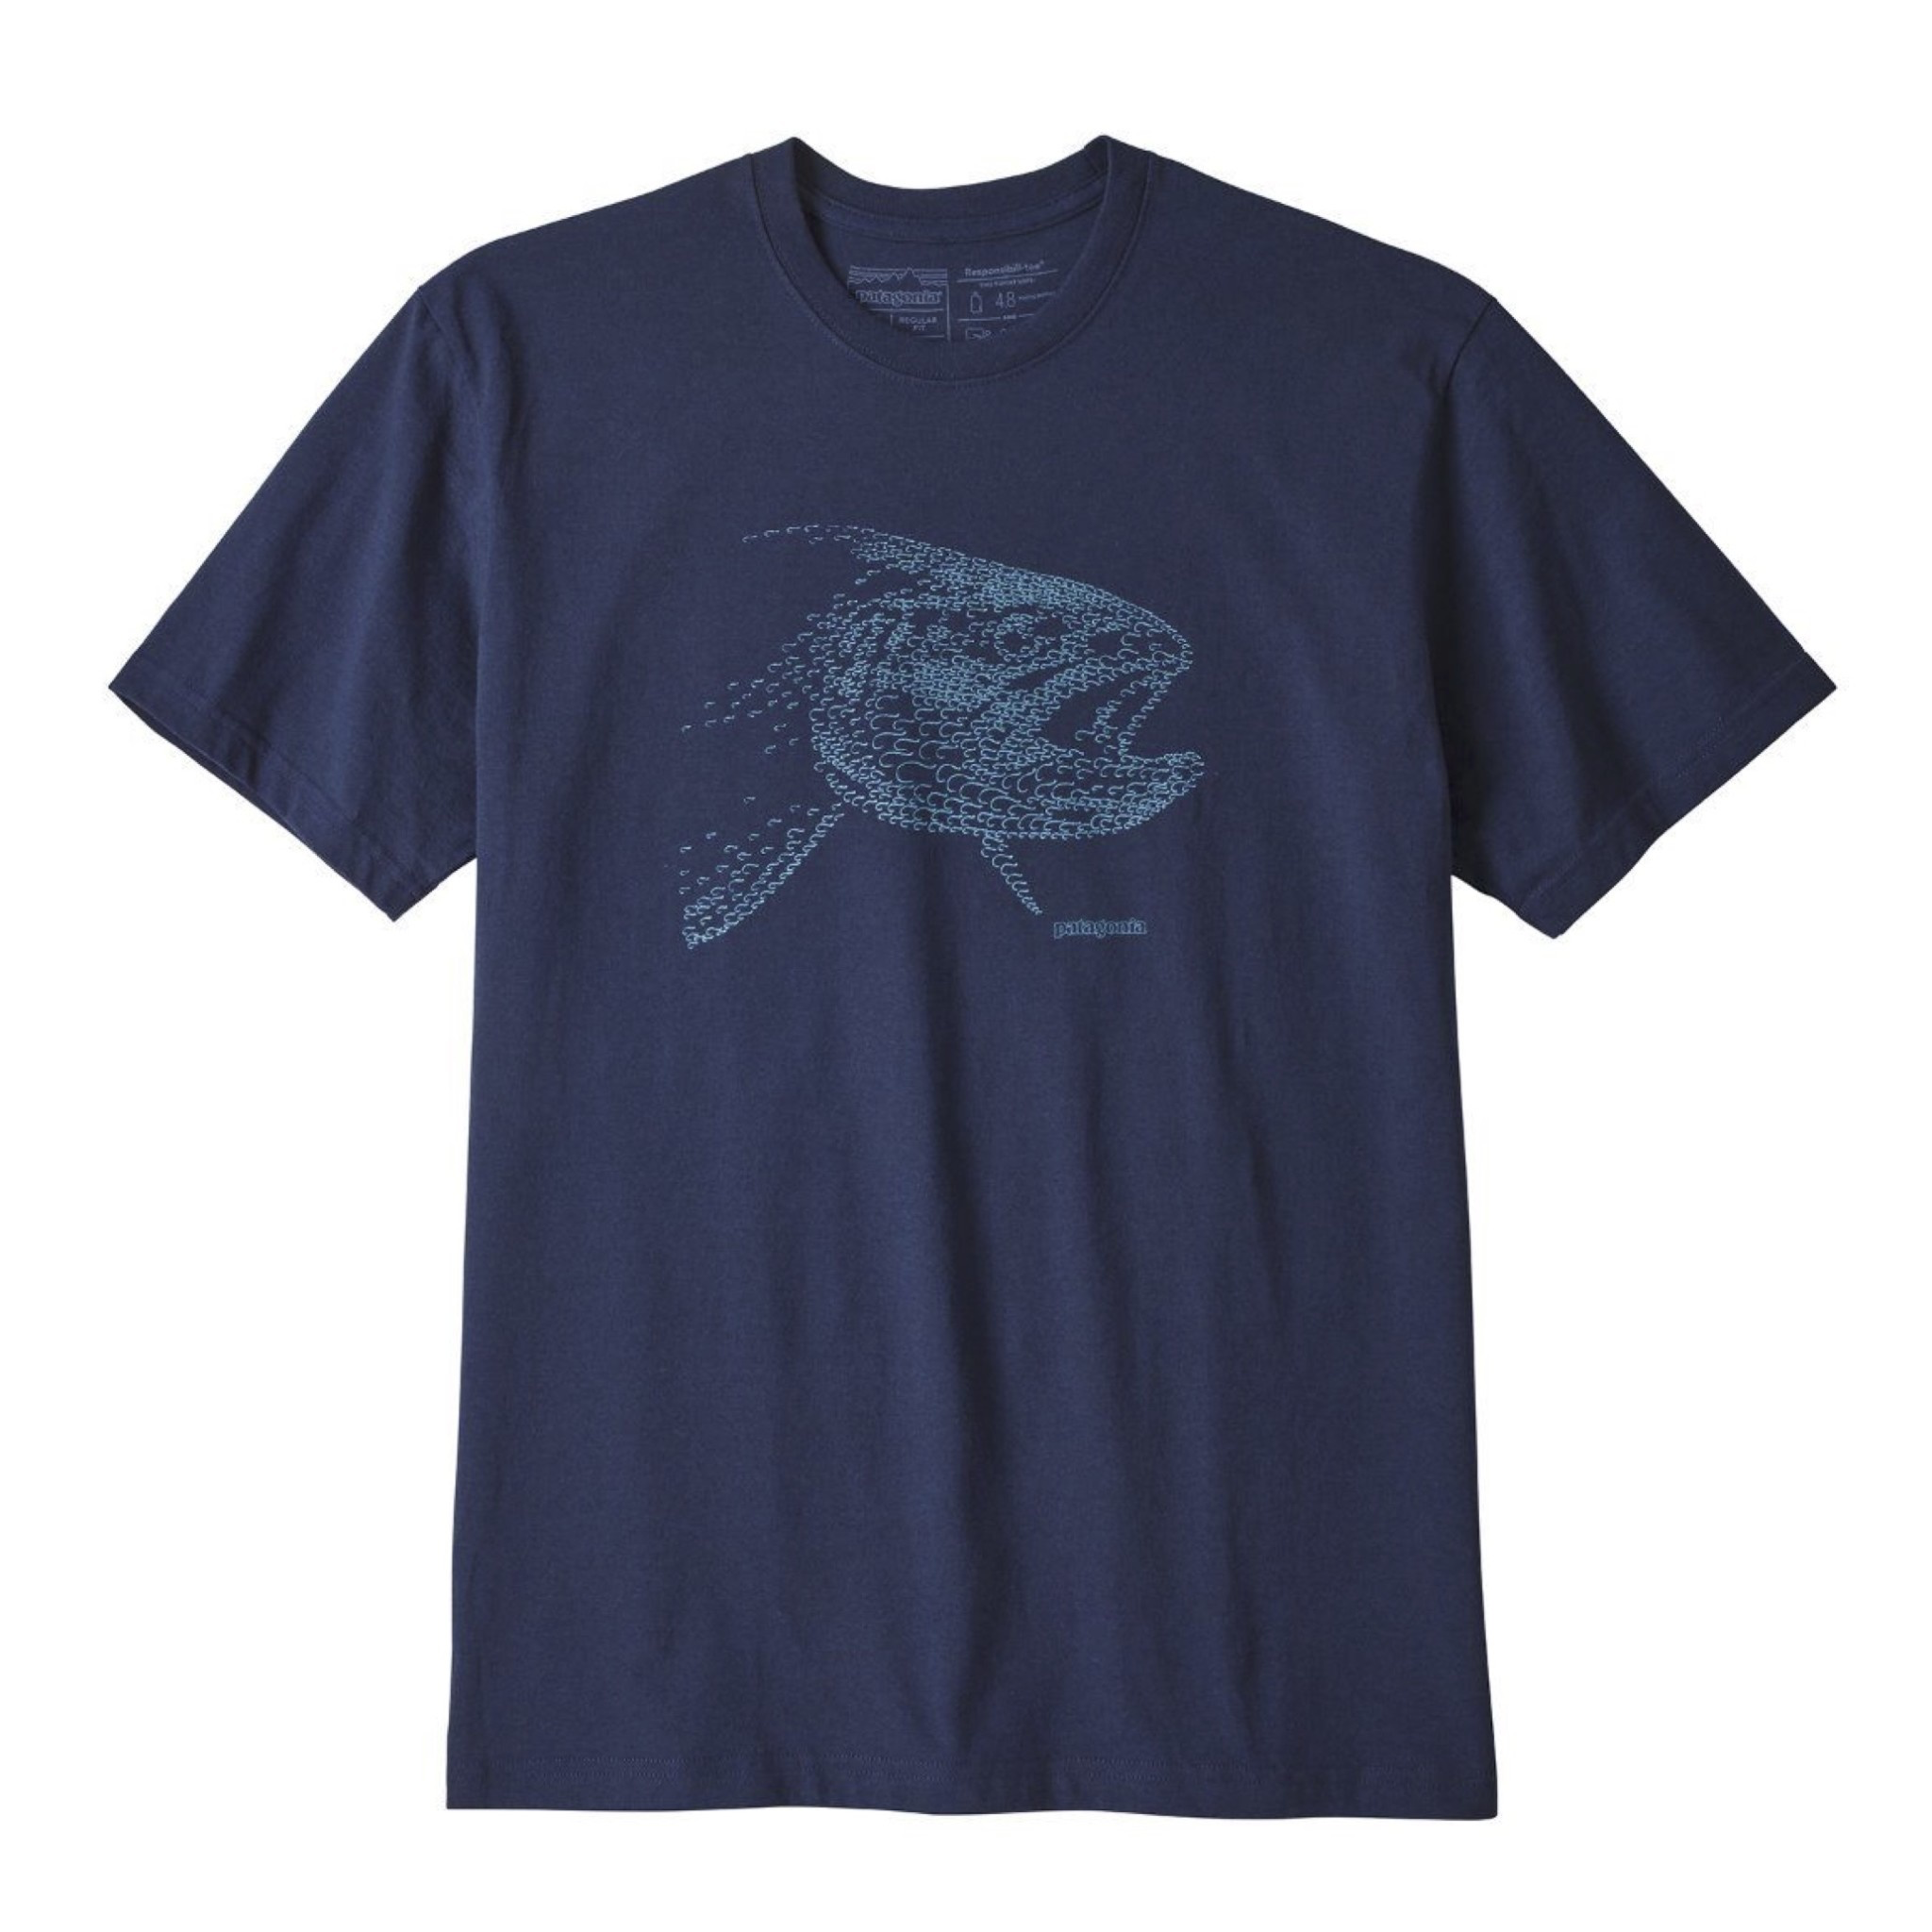 Patagonia M's Hooked Head Responsibili-Tee - Classic Navy w/ Trout - Large